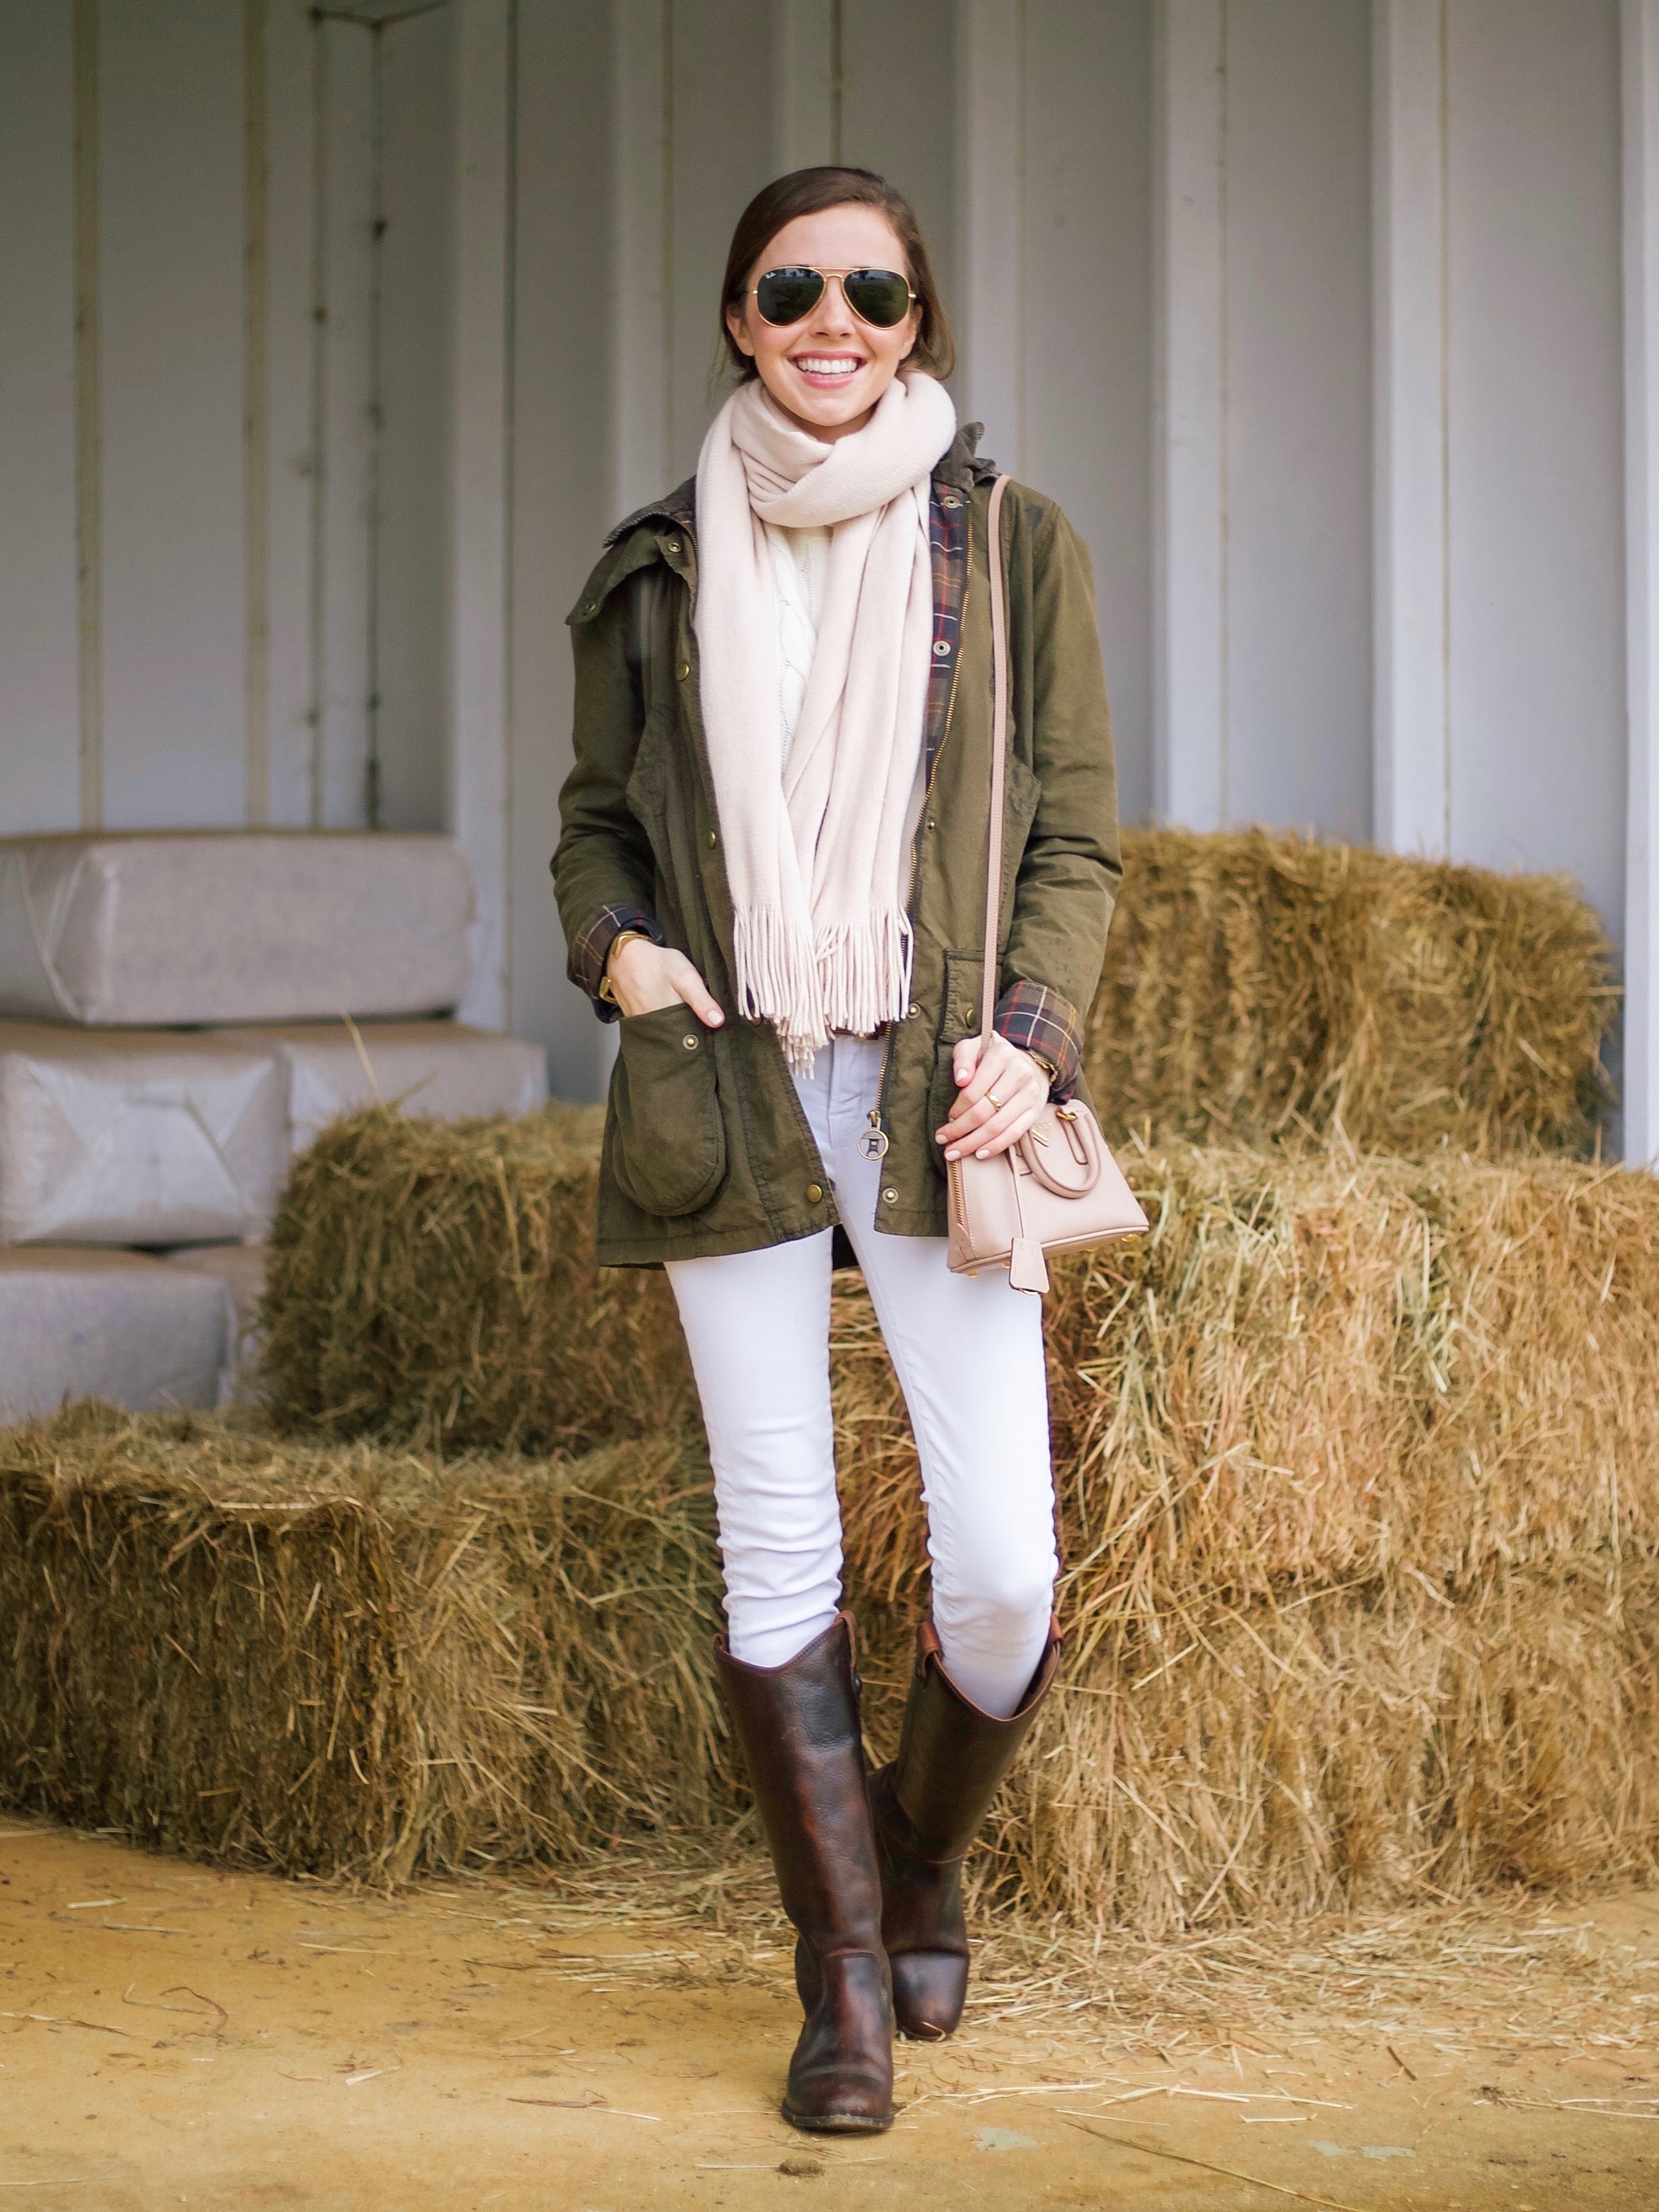 Barbour at the Barn — LCB STYLE & PHOTOGRAPHY